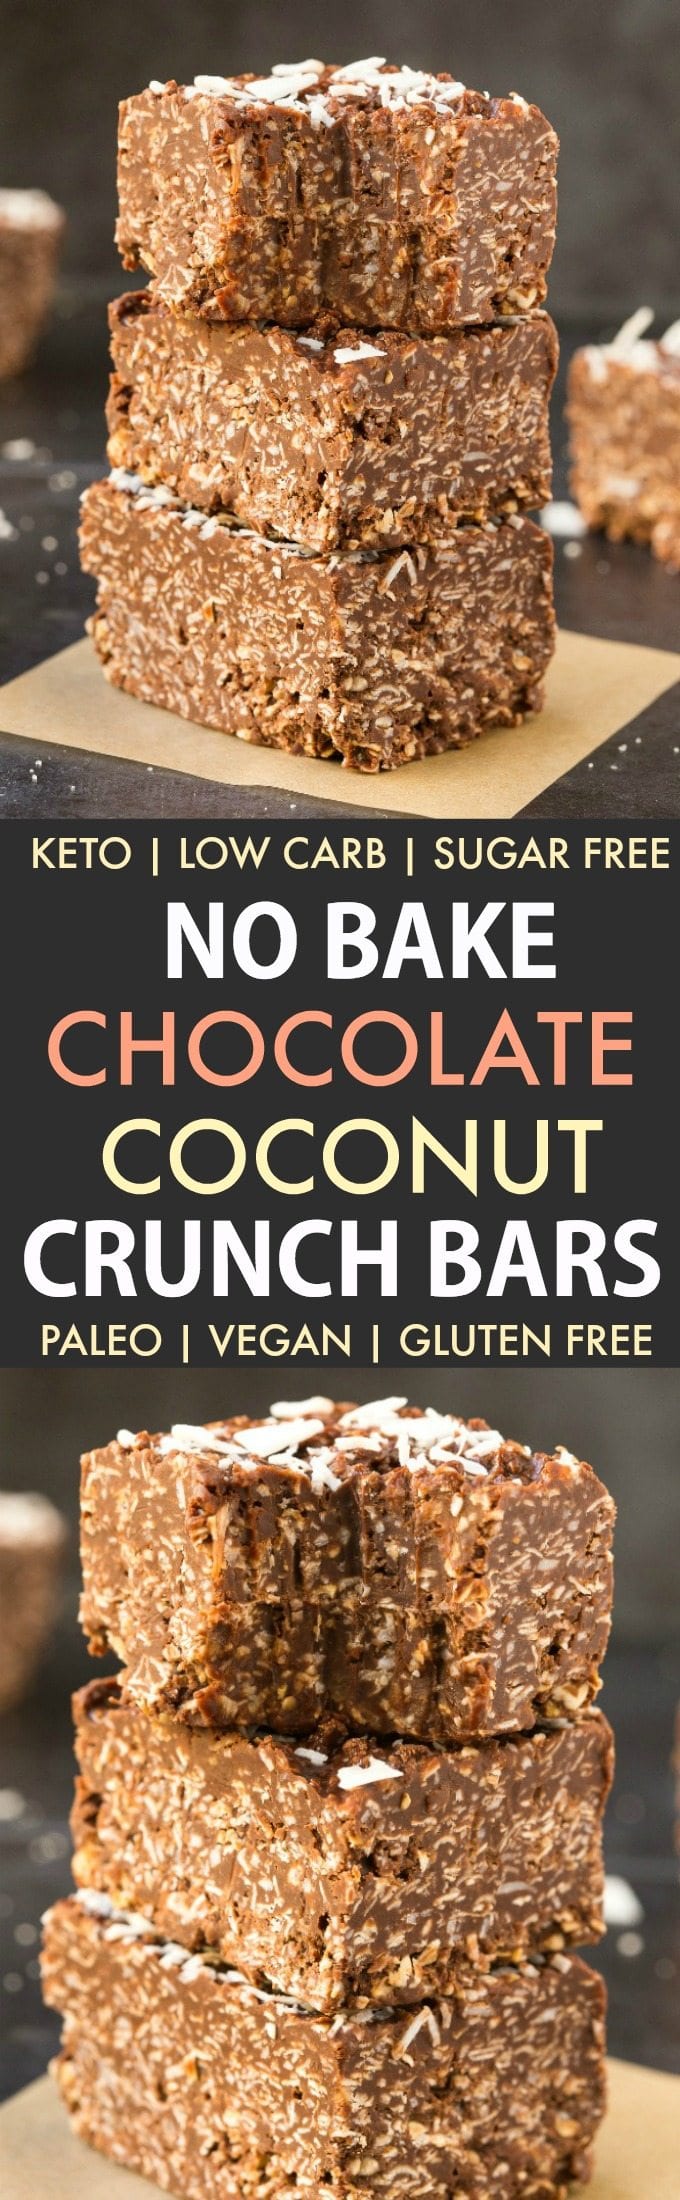 Homemade No Bake Keto Chocolate Coconut Crunch Bars in a collage